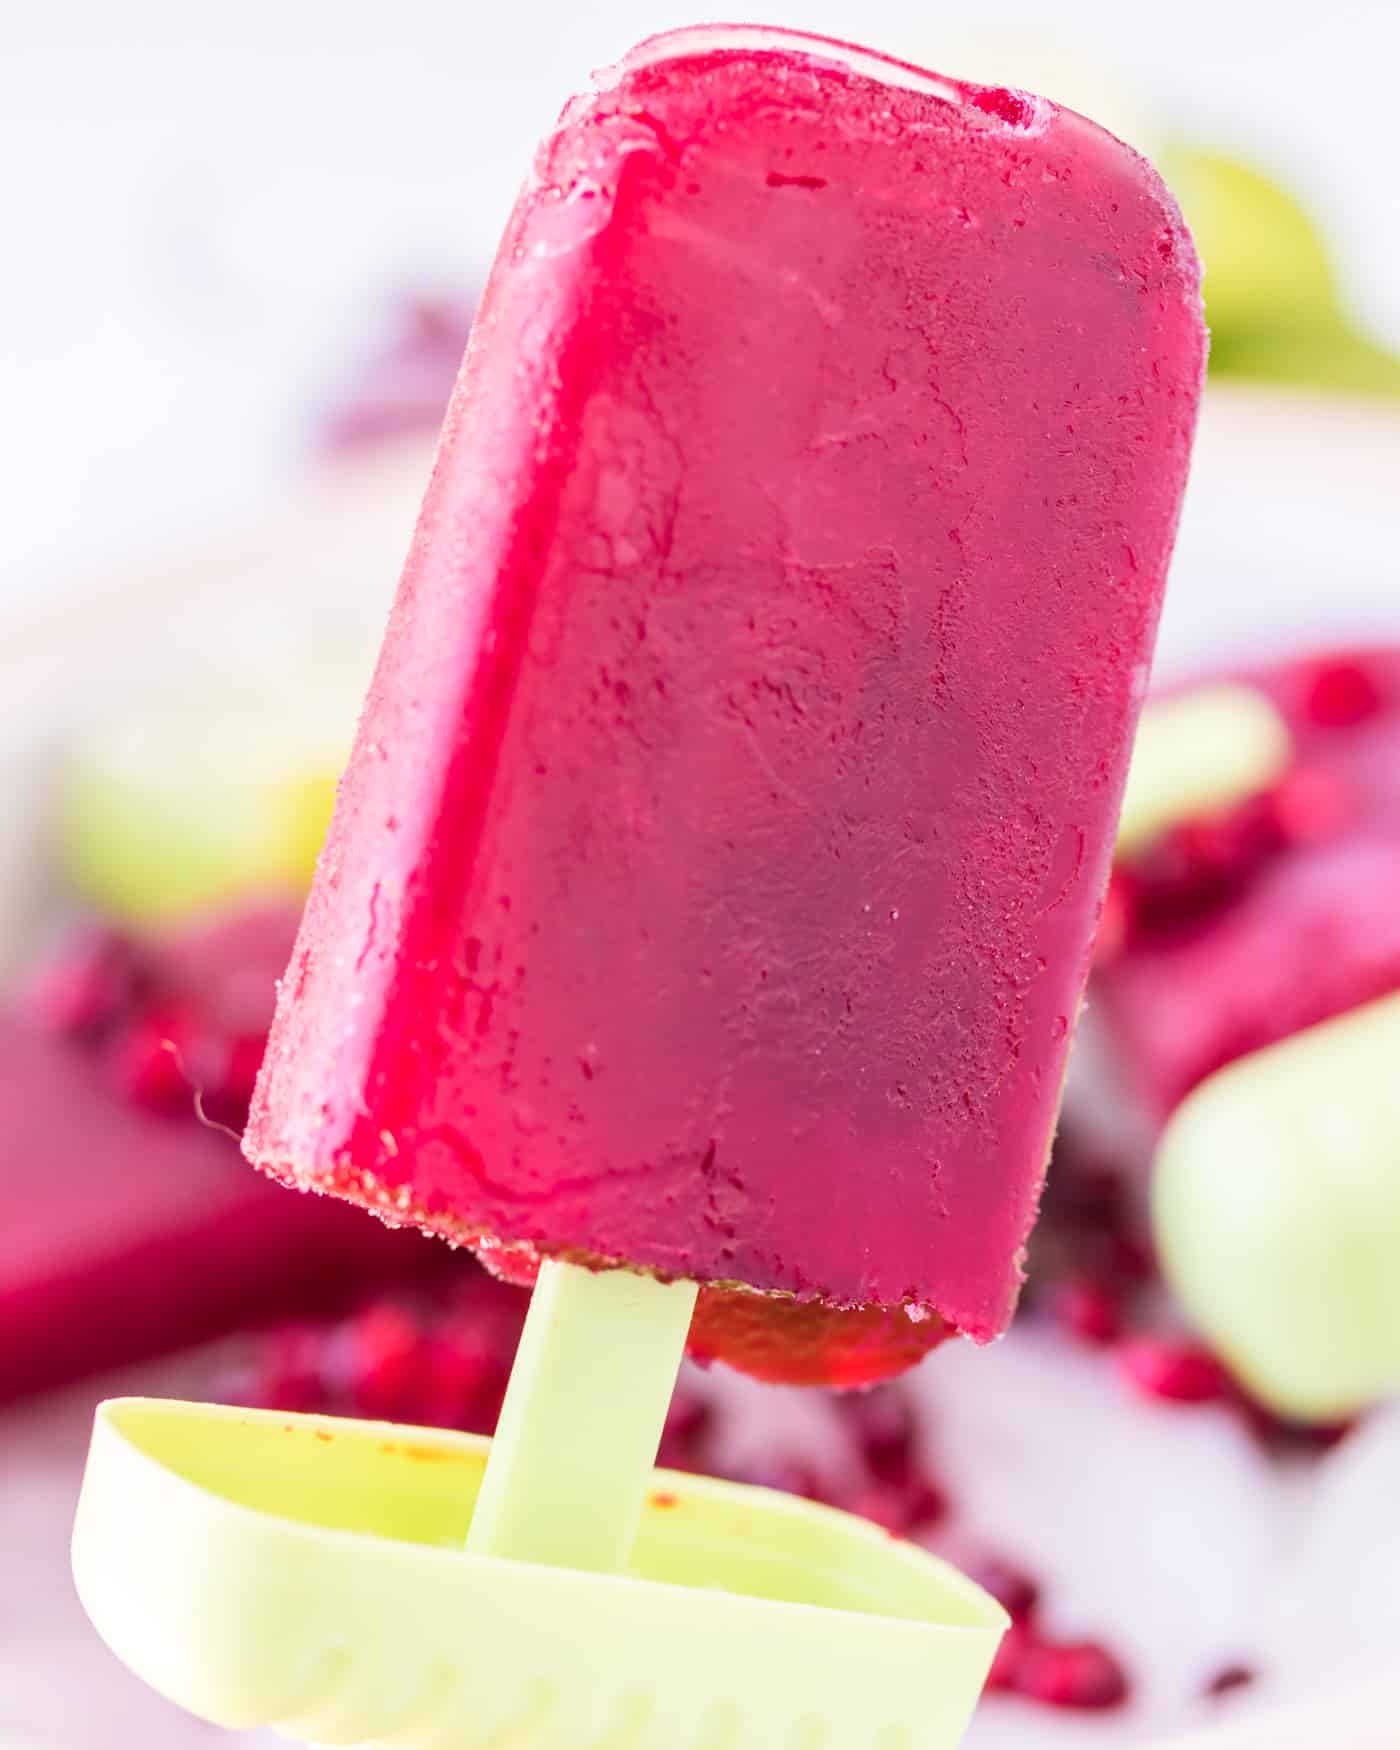 pomegranate popsicle ready to eat.